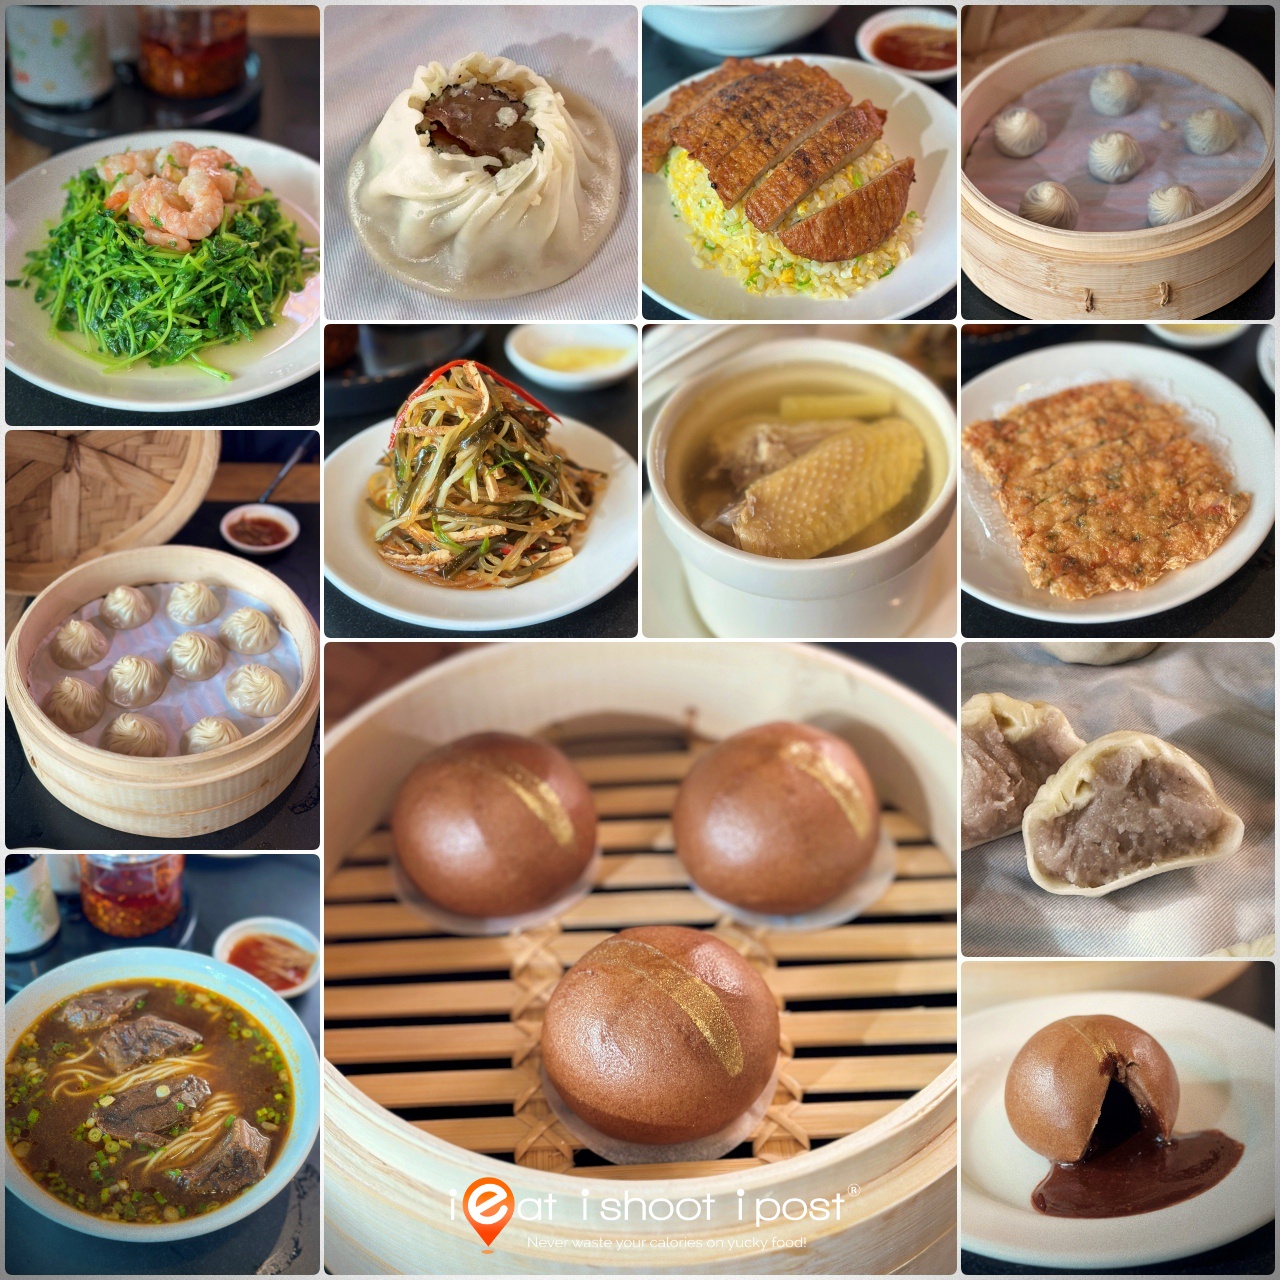 Din Tai Fung Top 10 Dishes and New Steamed Chocolate Lava Bun – Have You Tried Them All? featured image